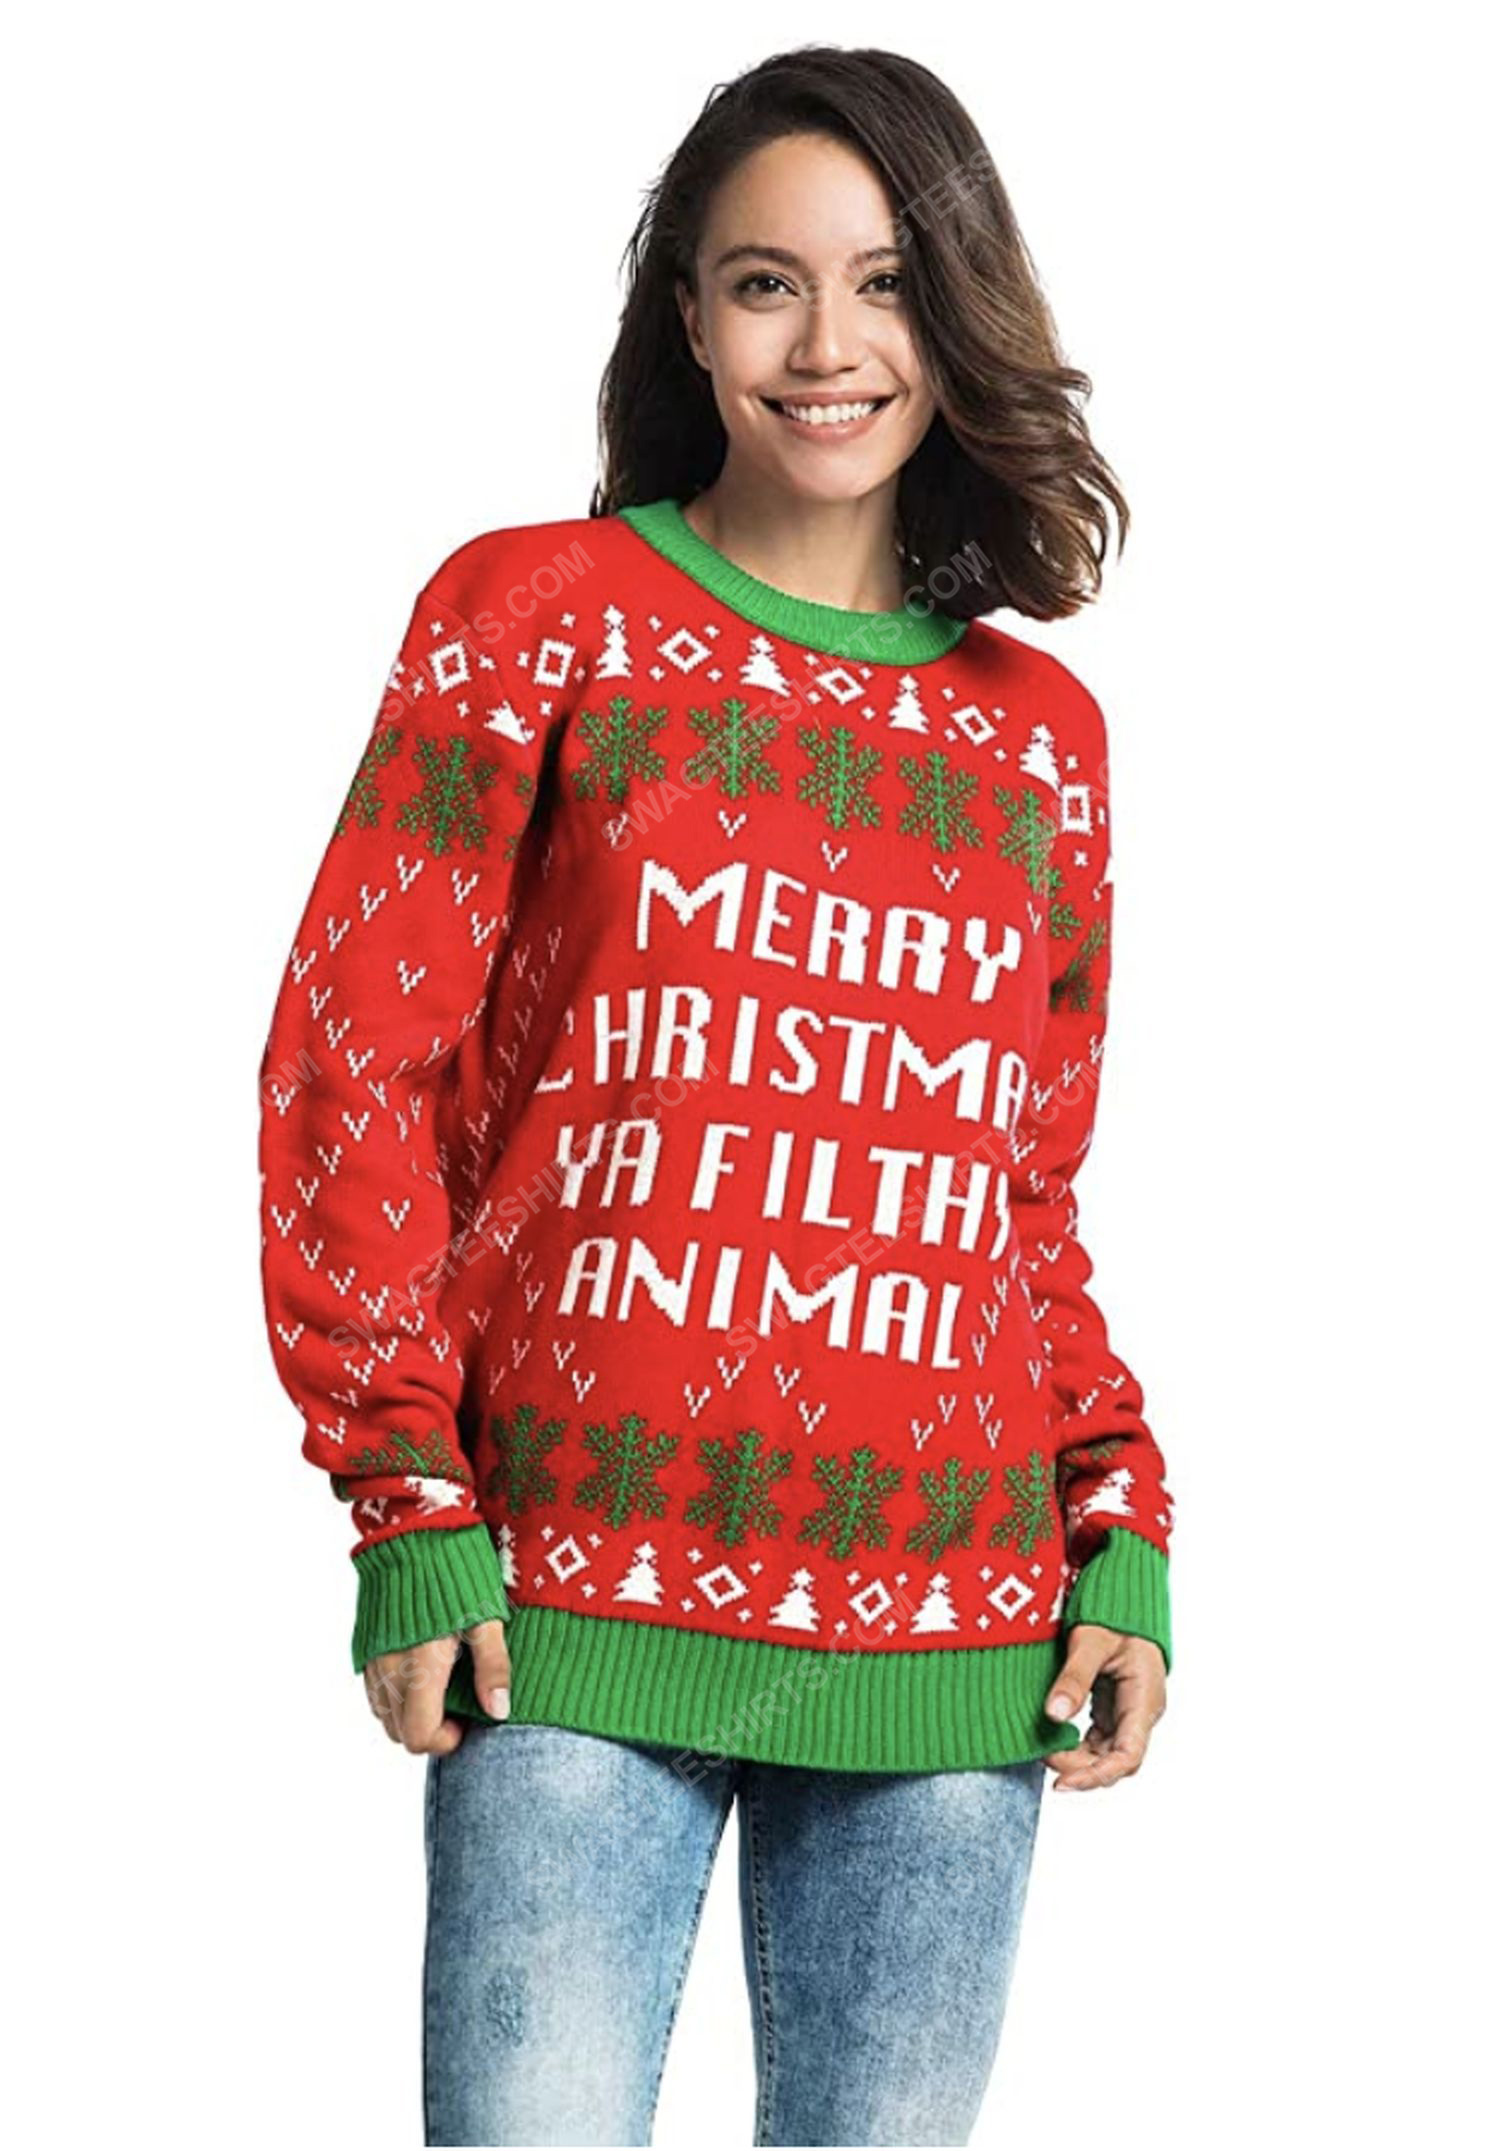 [special edition] Merry christmas ya filthy animal full print ugly christmas sweater – maria